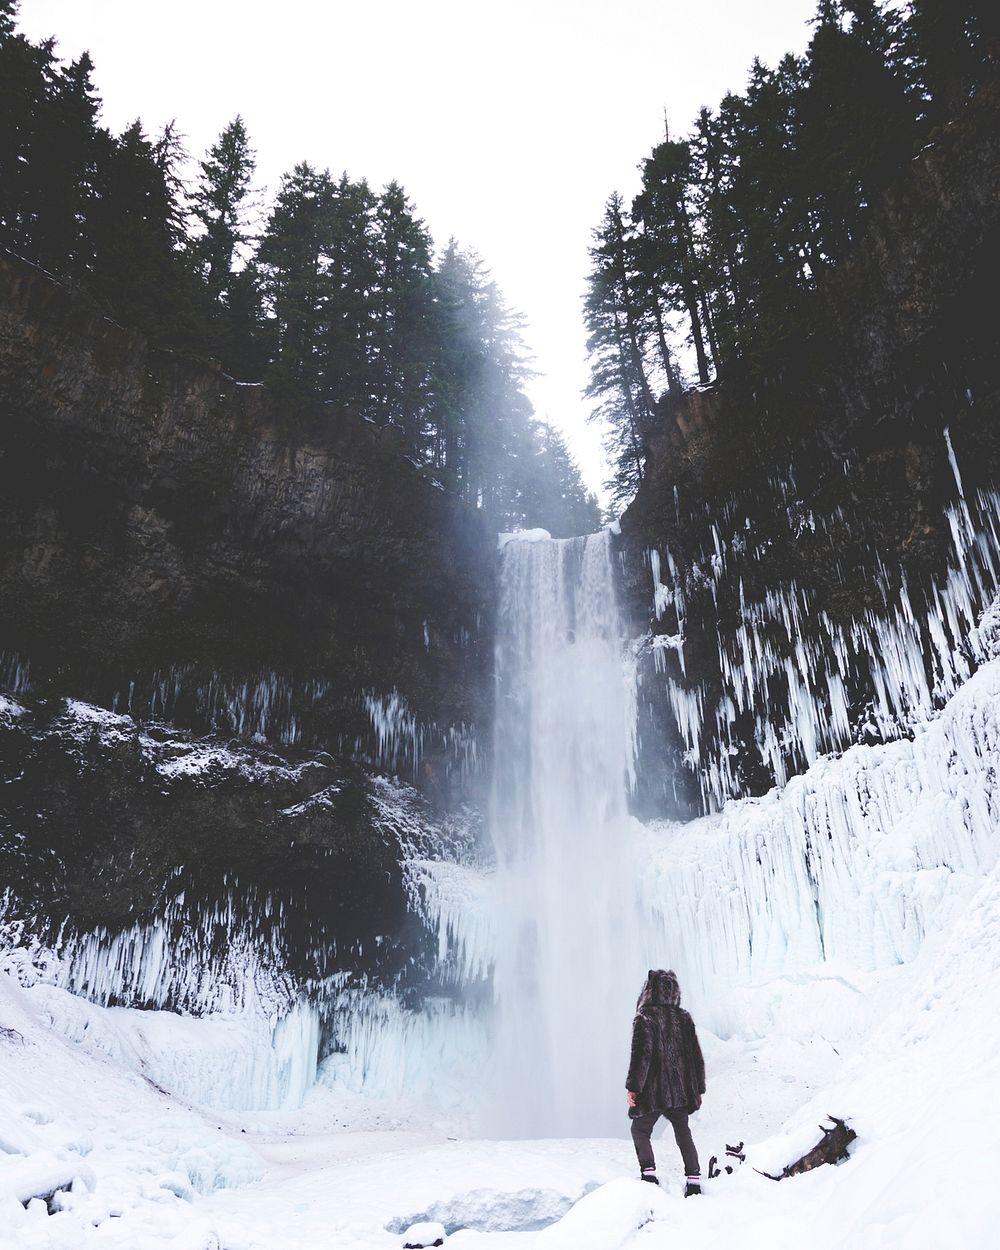 A person staring at the bottom of Brandywine Falls during a snowy winter season. Original public domain image from Wikimedia…